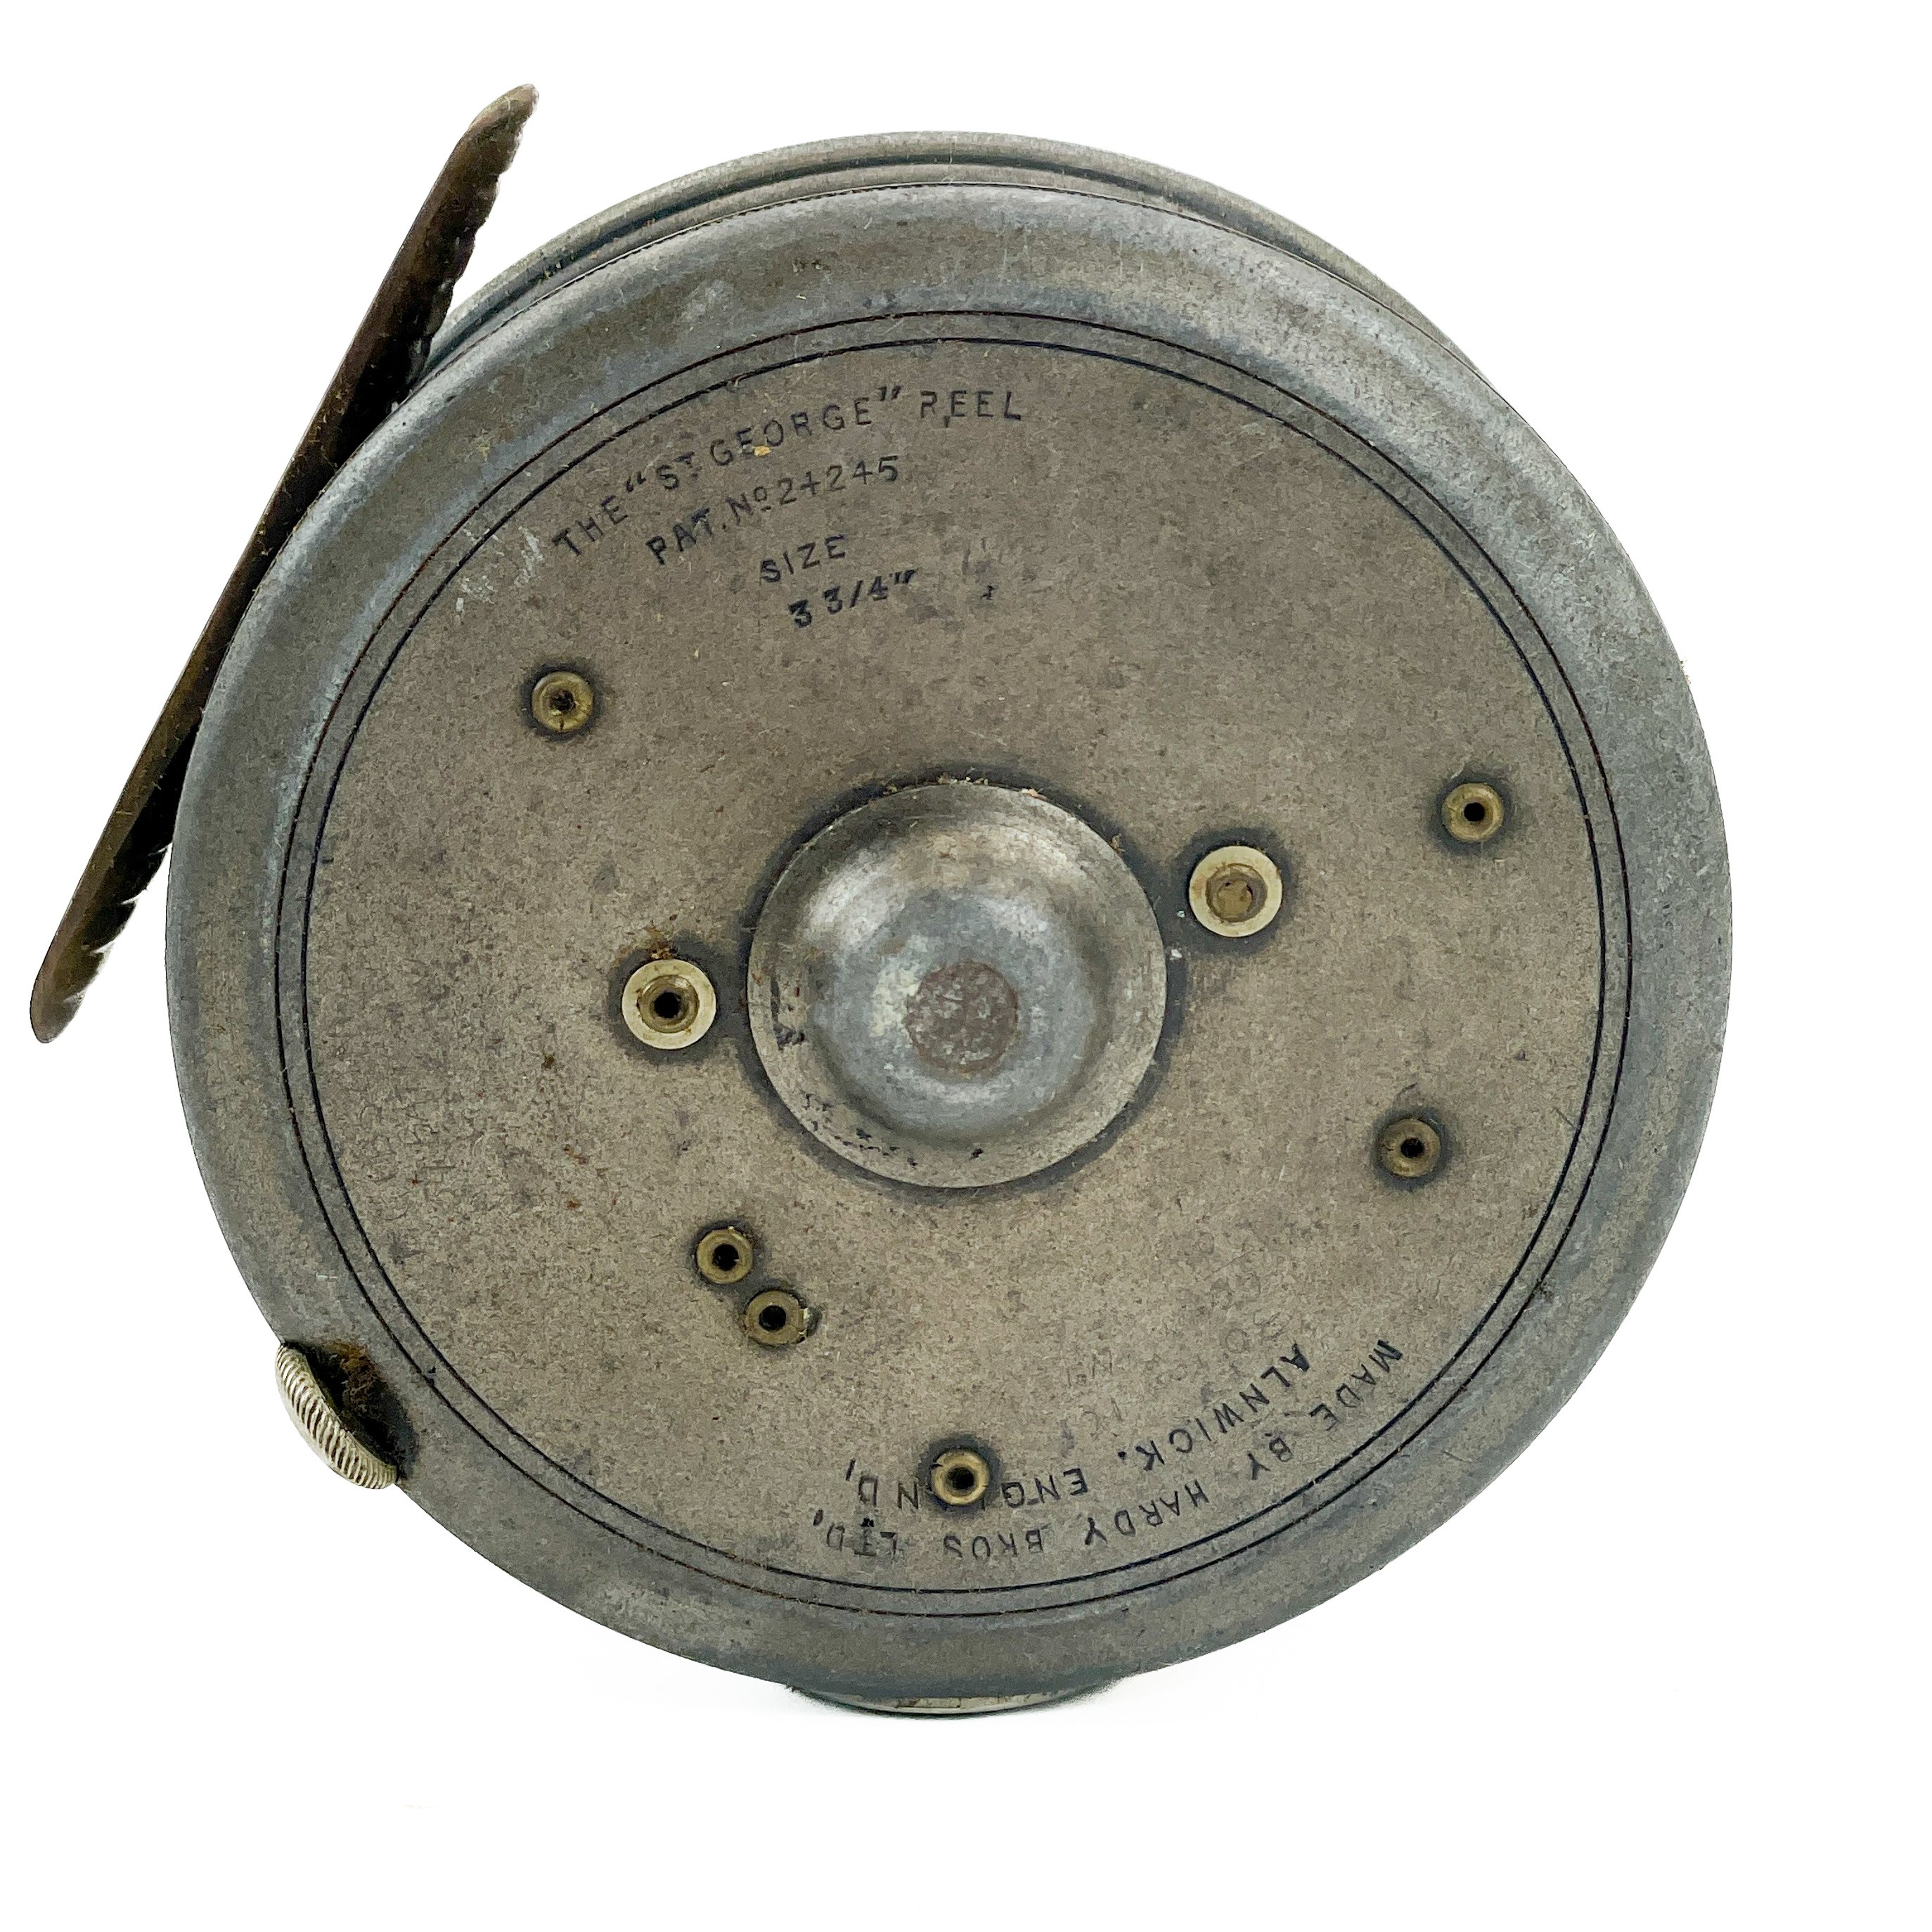 Sold at Auction: Vintage Hardy Bro Ltd Fly Fishing Reel The ST George Pat  No 2+245 size 3,,in Leather Case